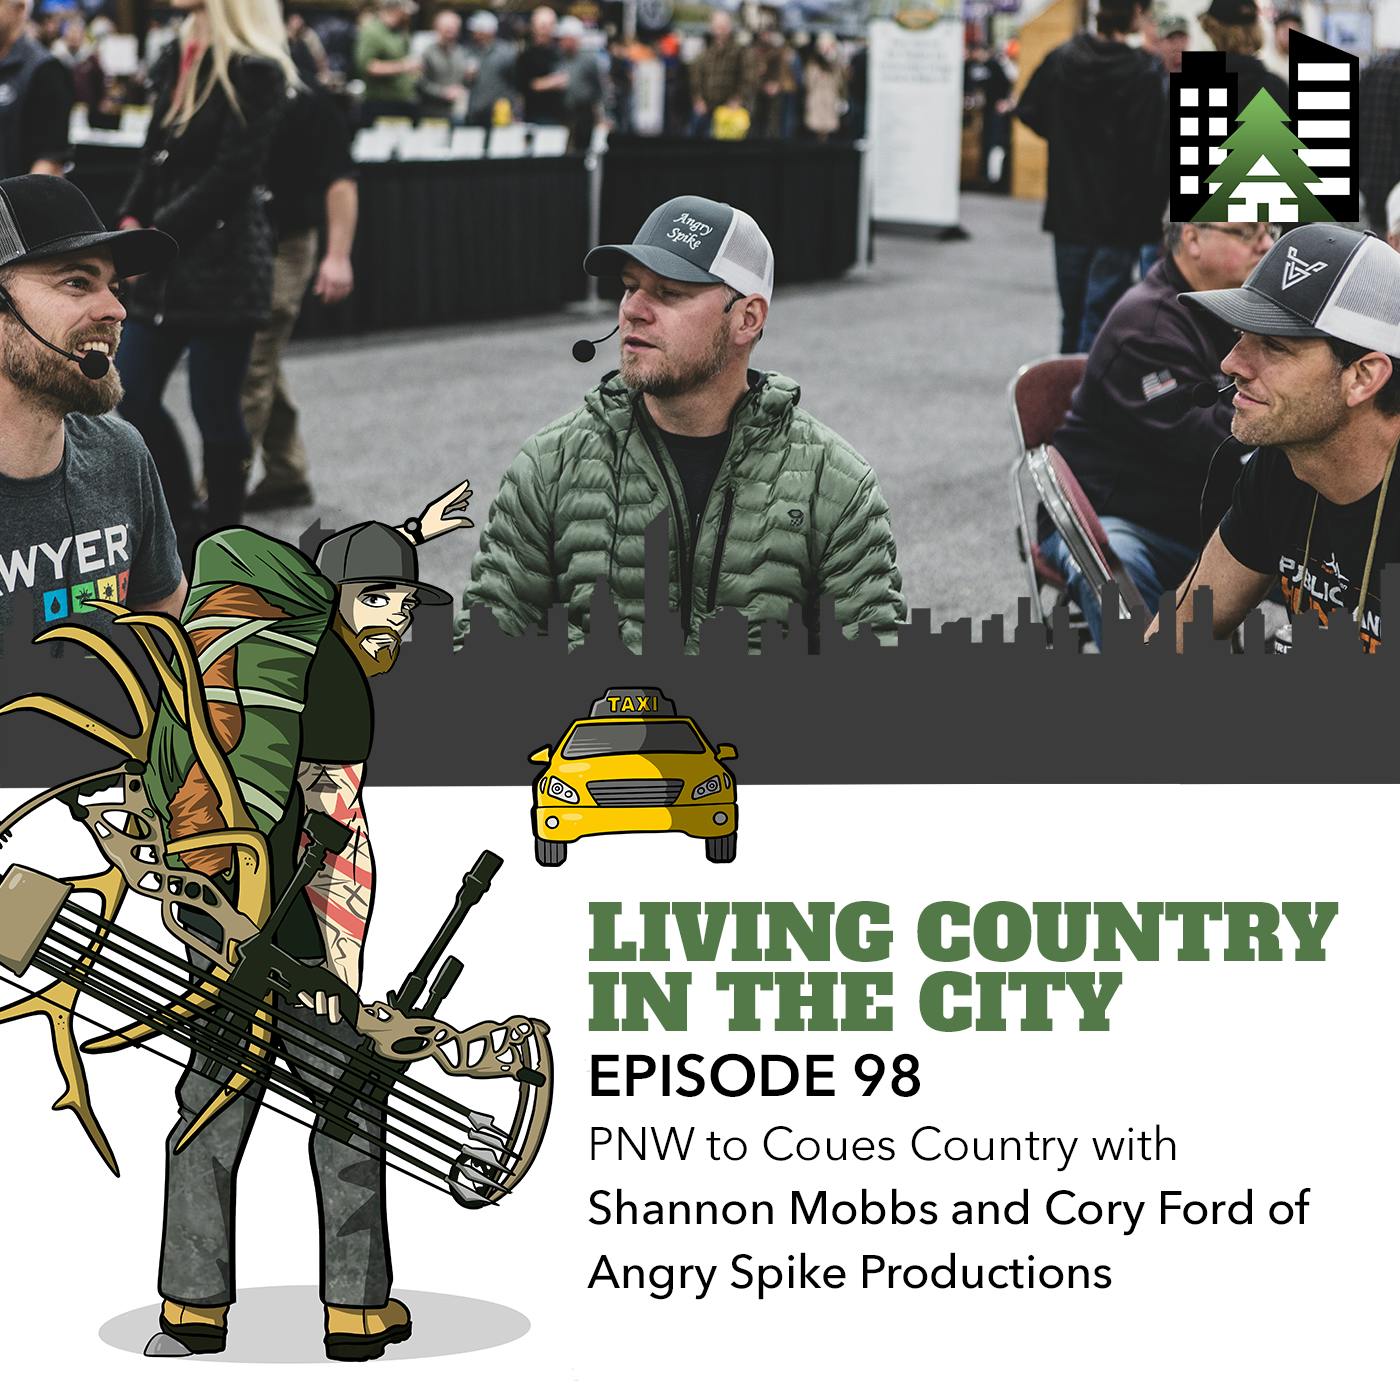 Ep 98 - PNW to Coues Country with Shannon Mobbs and Cory Ford of Angry Spike Productions